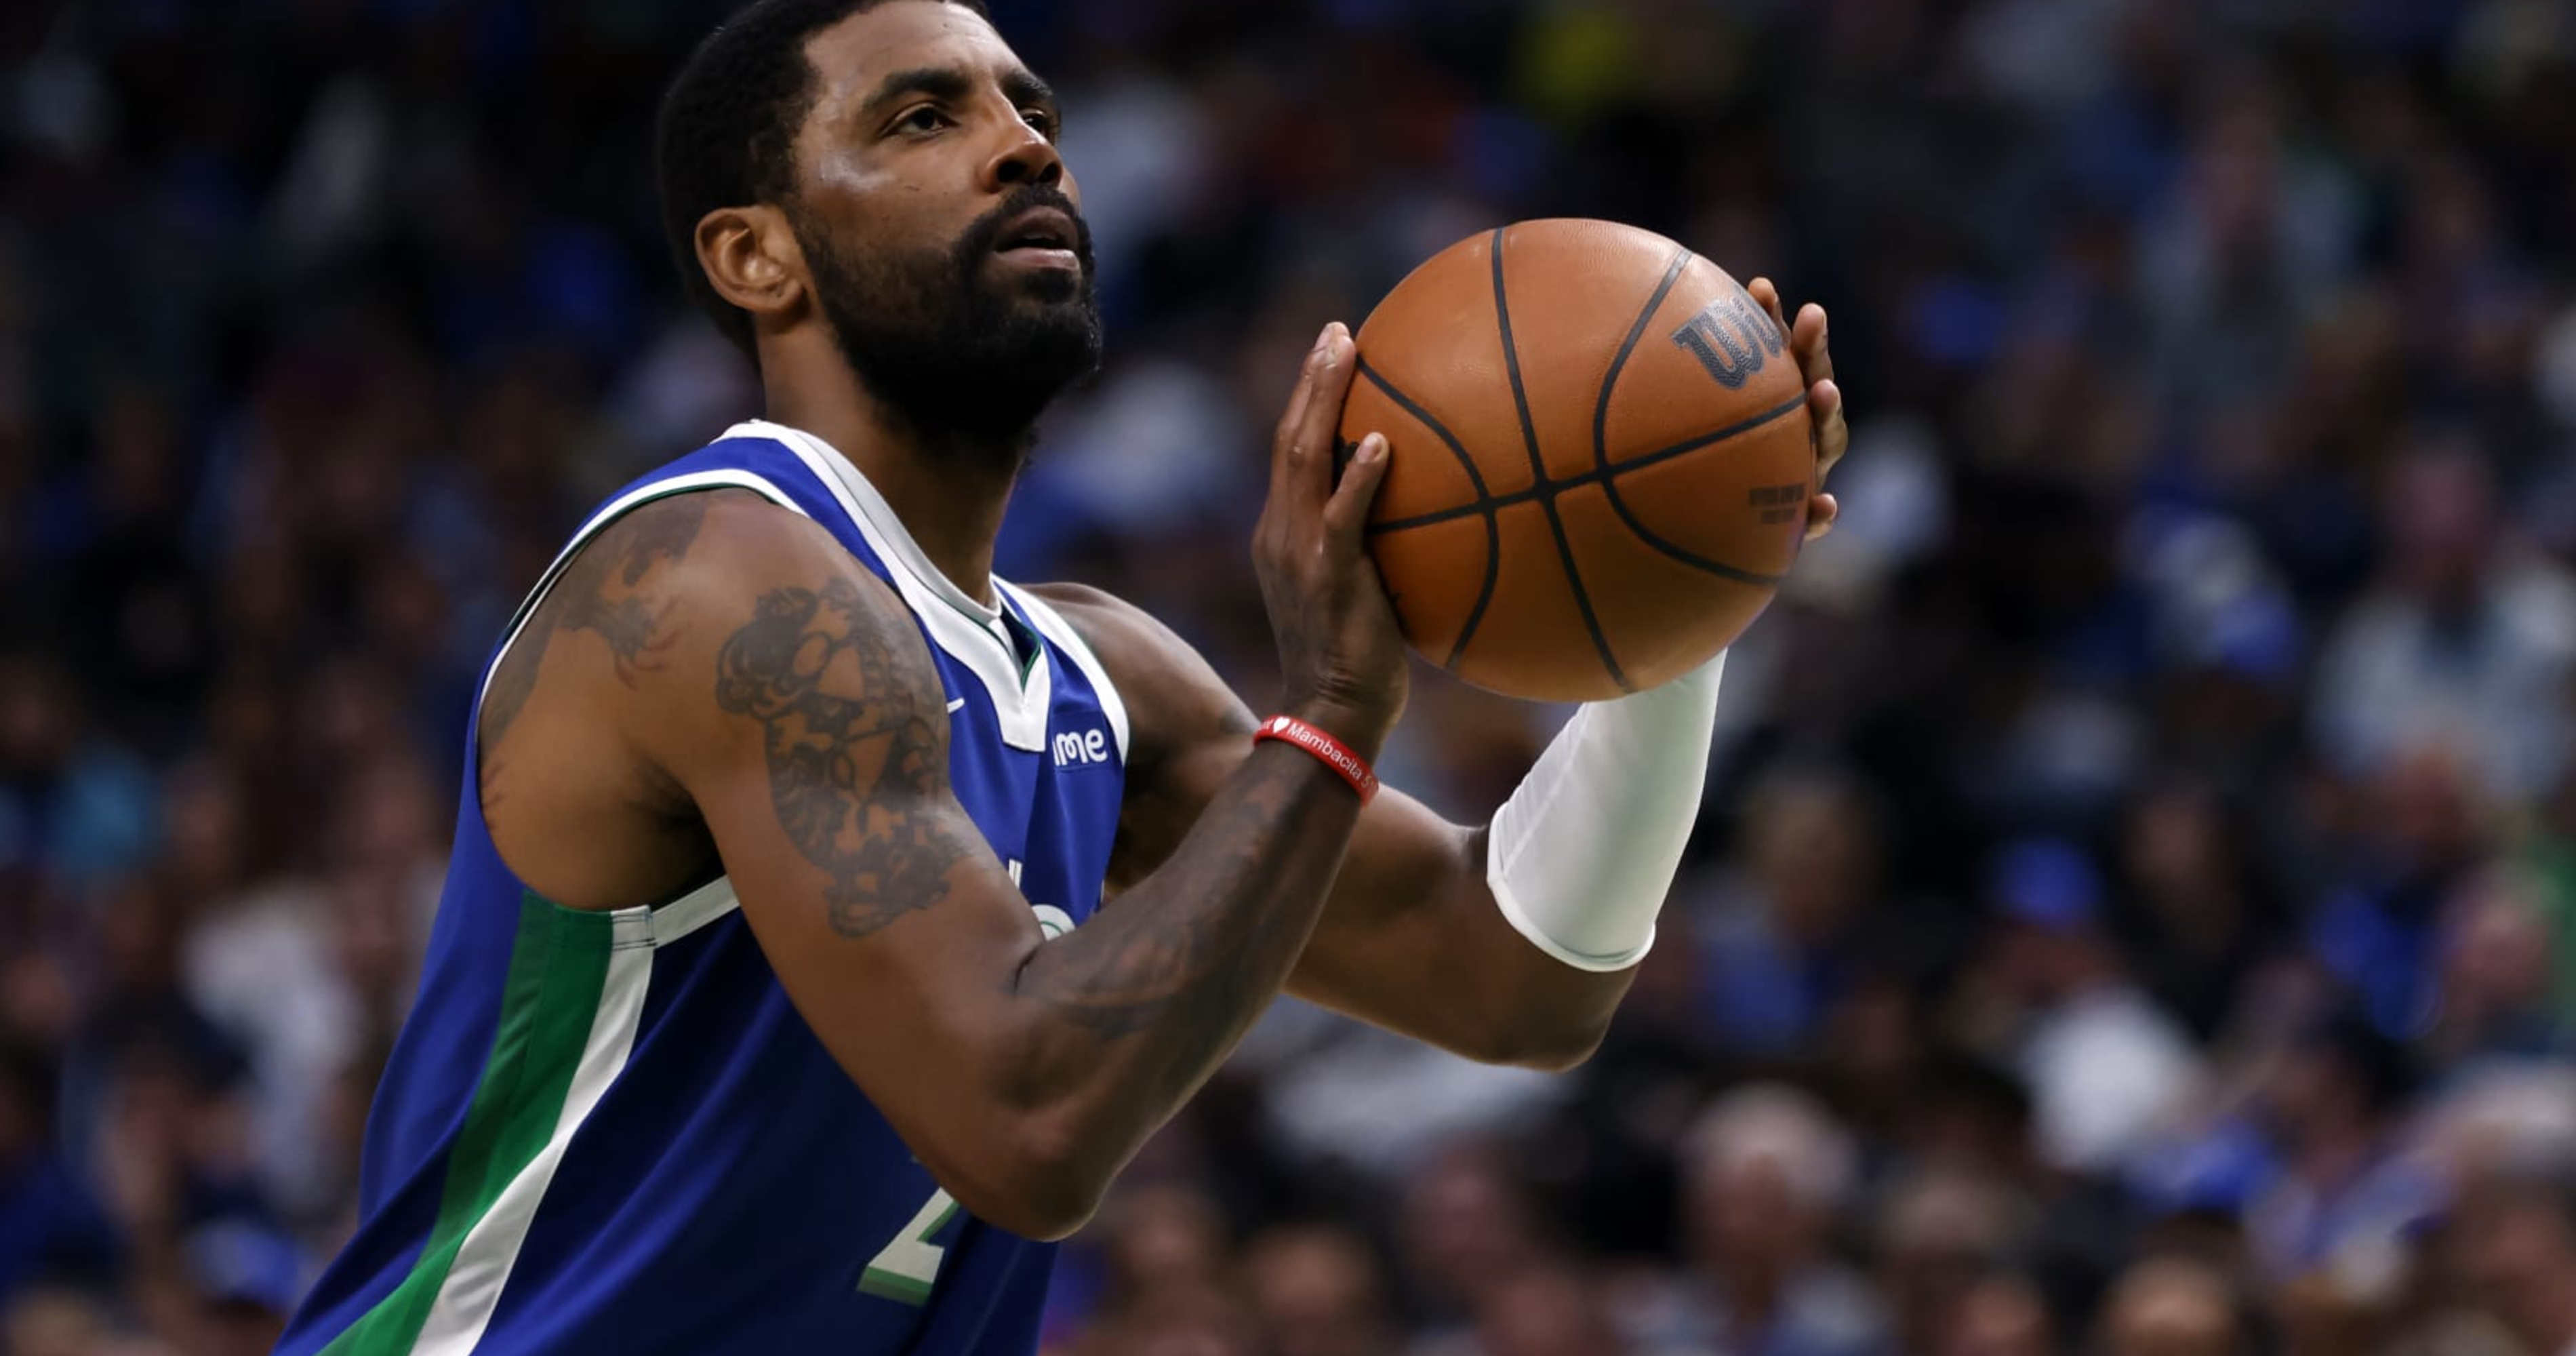 Kyrie Irving to change jersey number if he re-signs with Mavericks